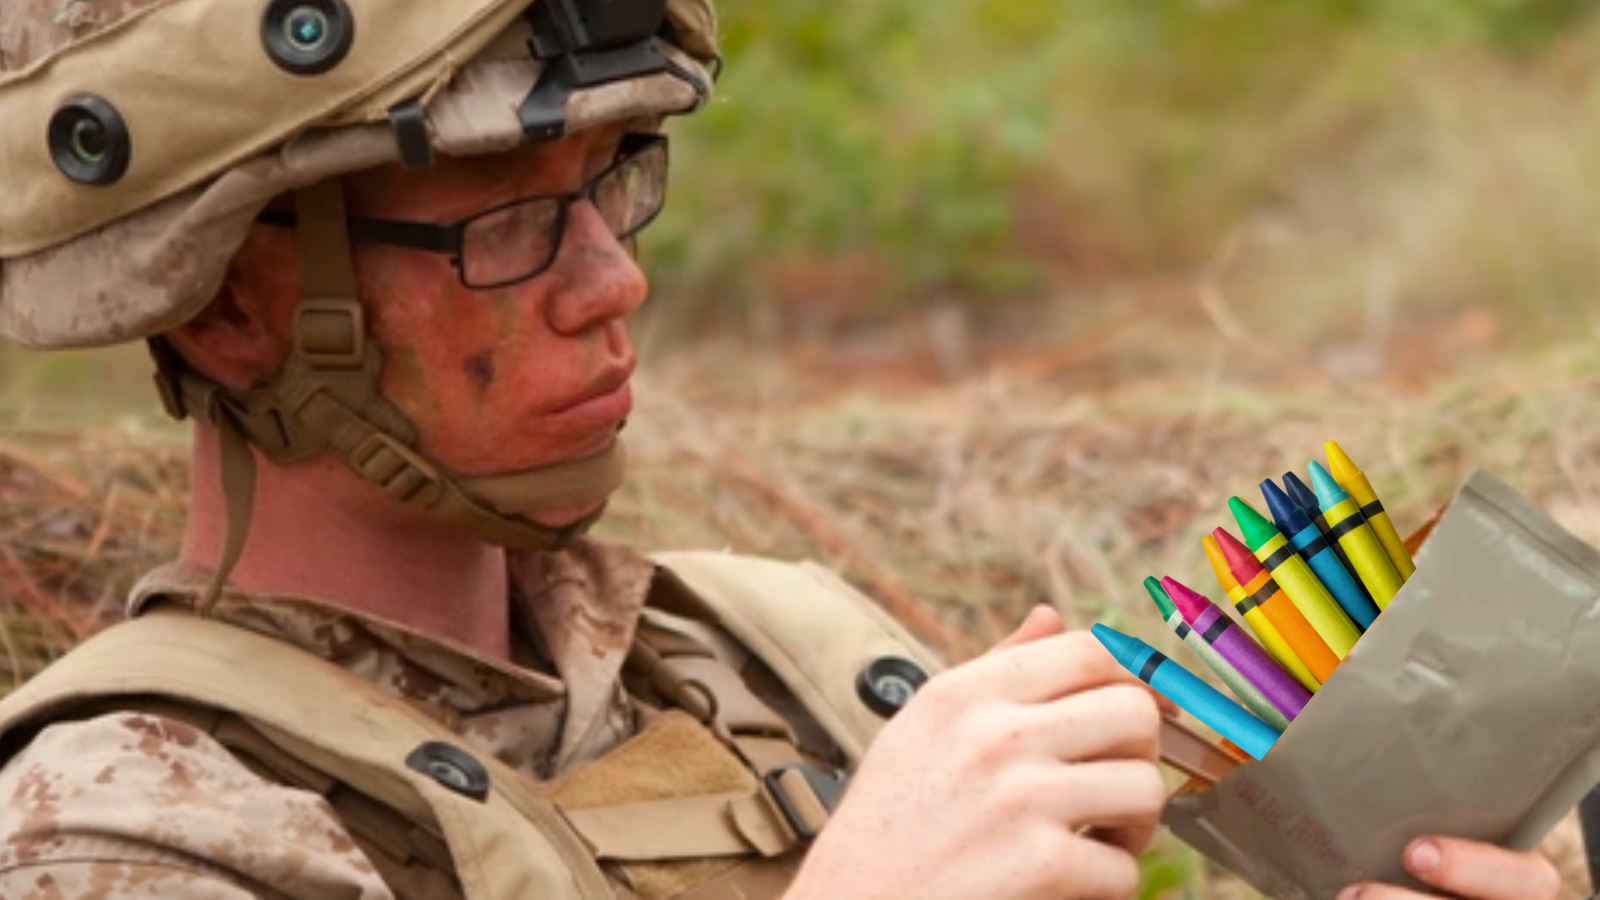 Why do Marines like to eat crayons? - Quora